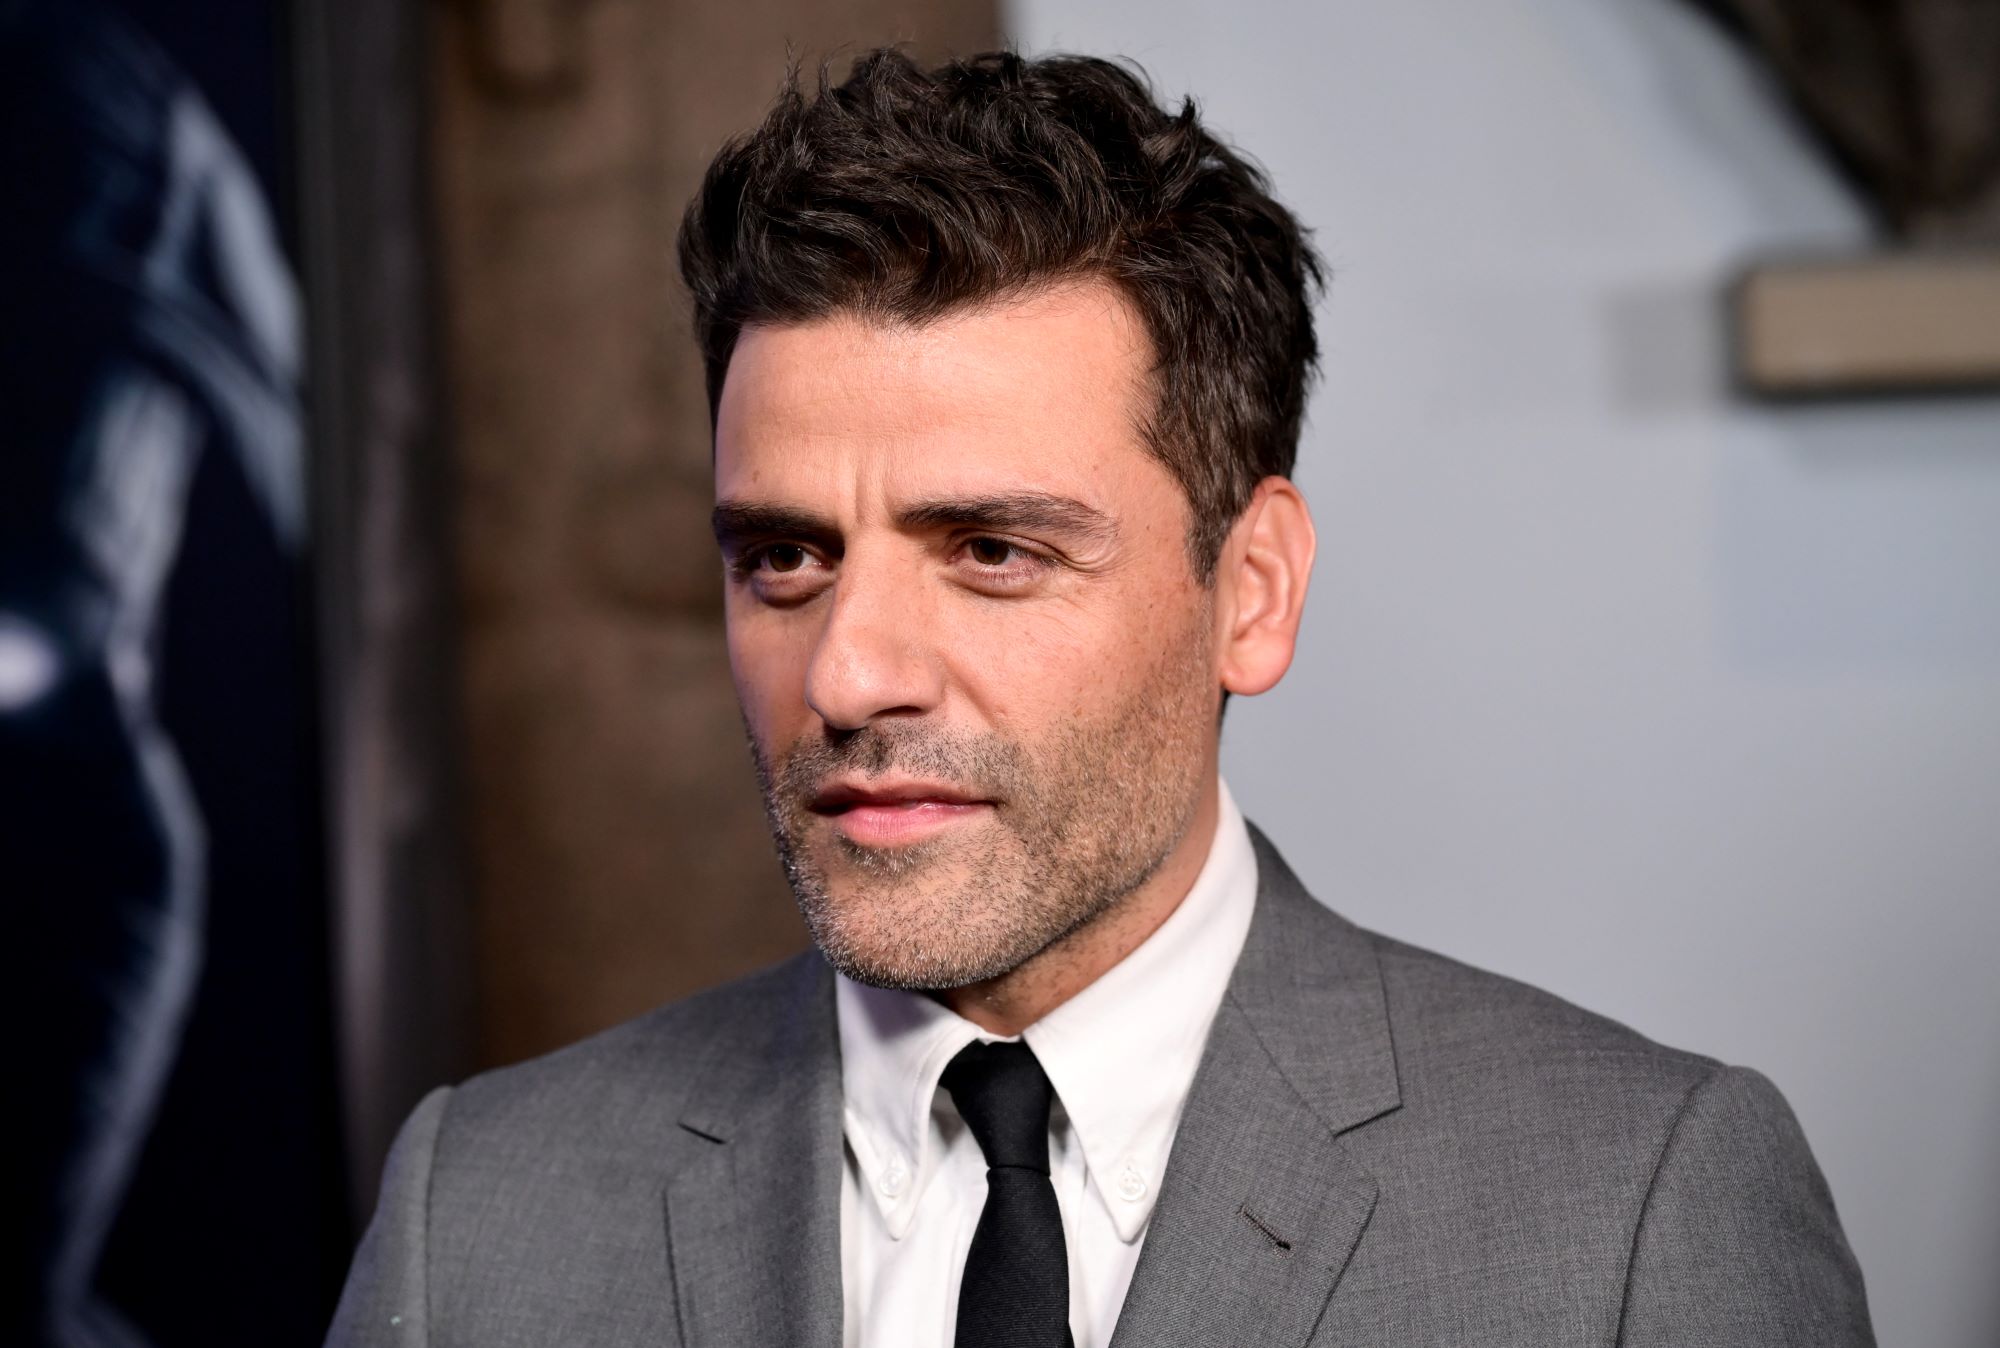 'Moon Knight' star Oscar Isaac wears a gray suit over a white button-up shirt and black tie.